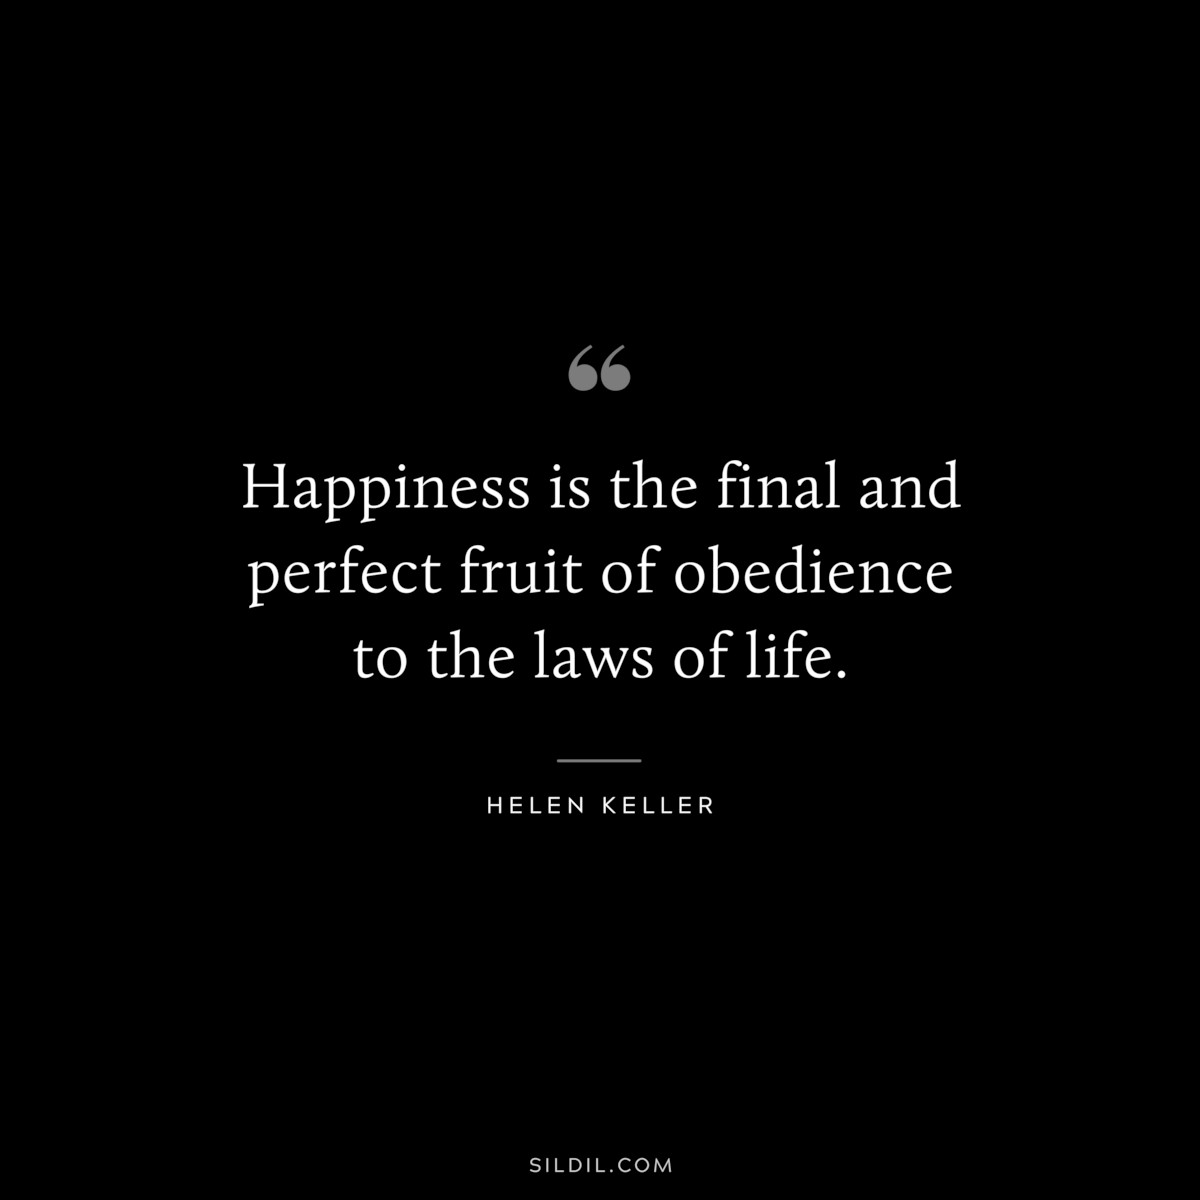 Happiness is the final and perfect fruit of obedience to the laws of life. ― Helen Keller